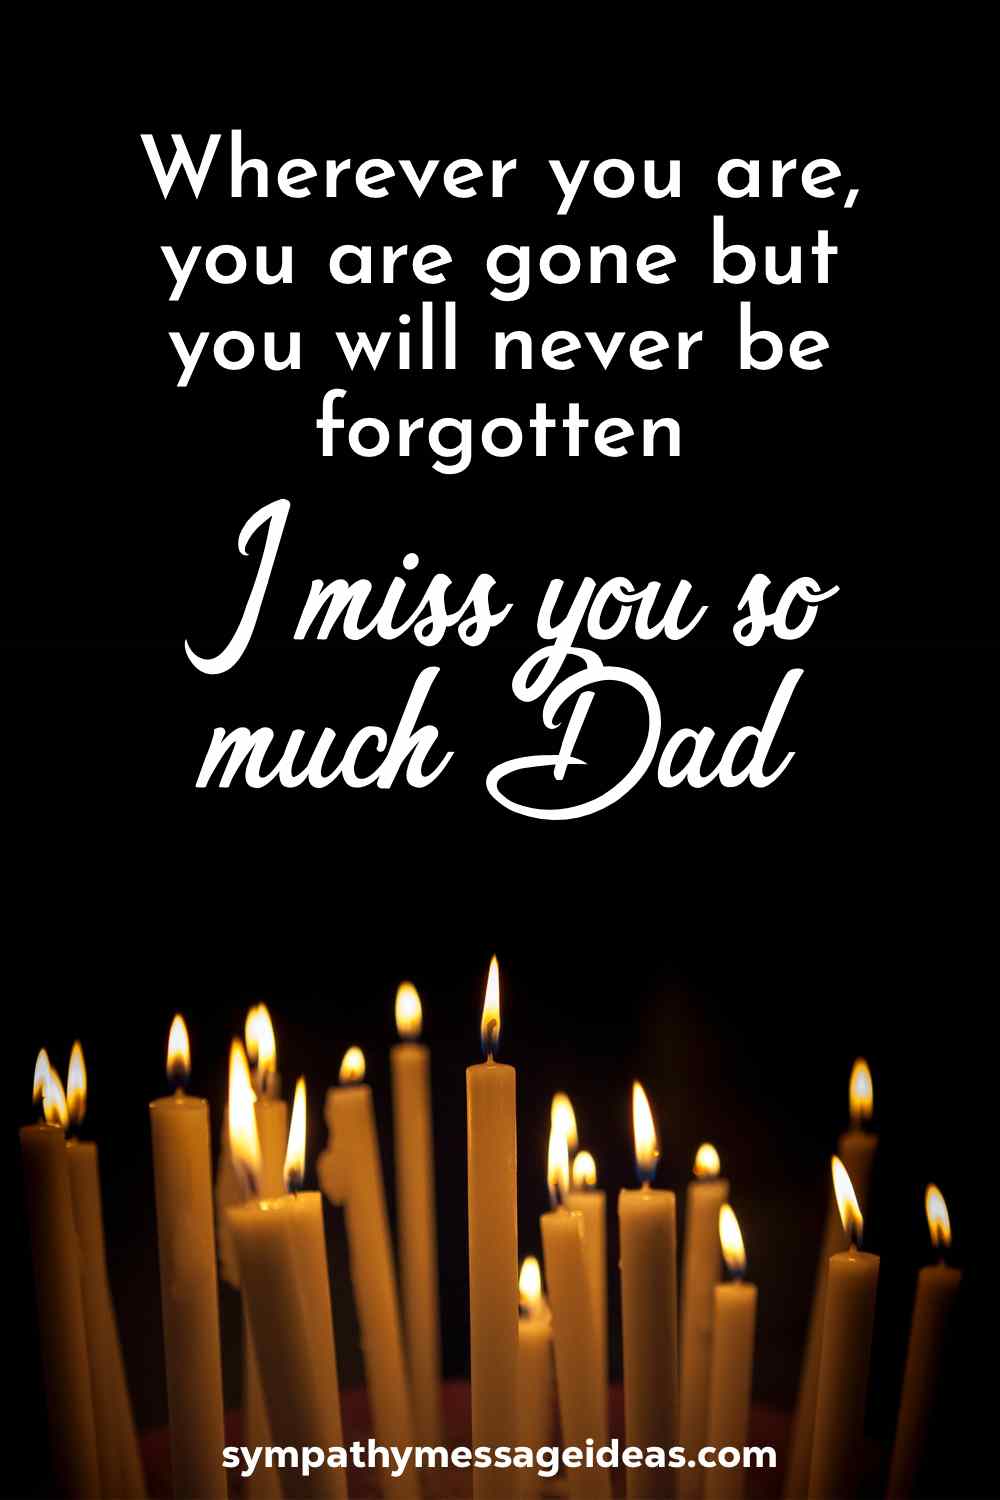 Stunning Collection Of 999 Full 4k Miss You Dad Images The Best Picks